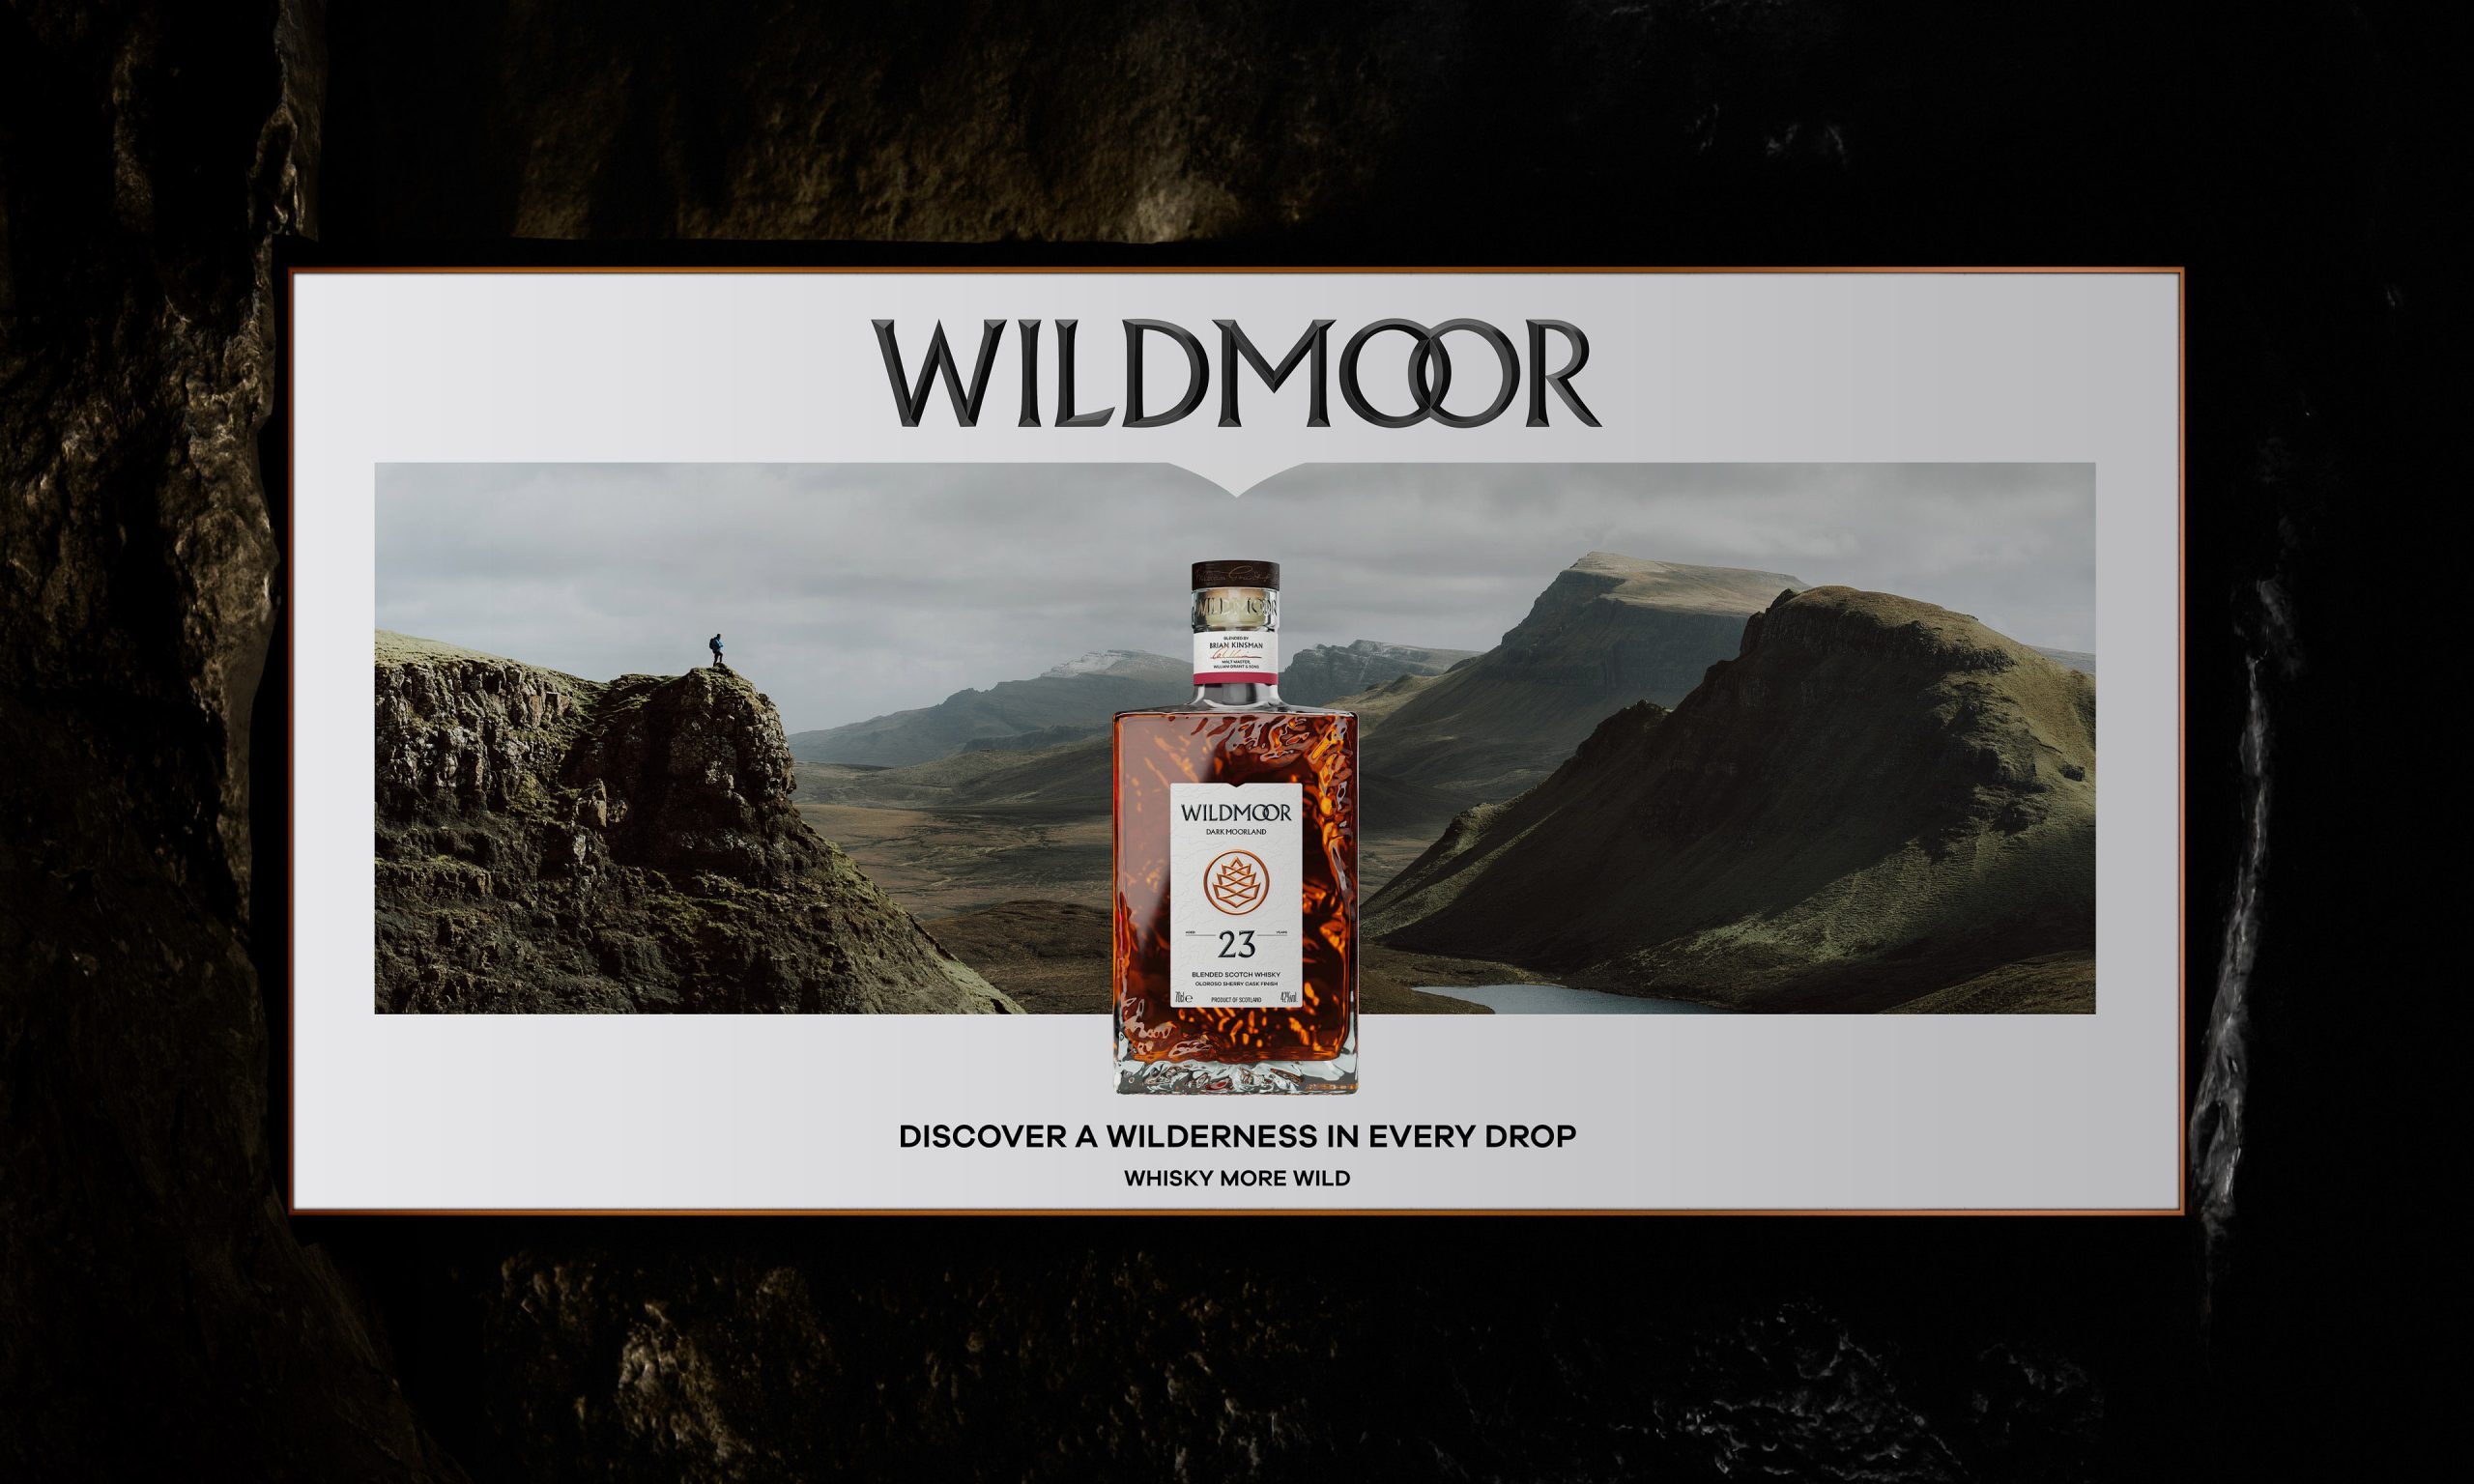 Wildmoor’s Funky Topographical Bottle Puts the Scottish Highlands in a Stylish Whisky